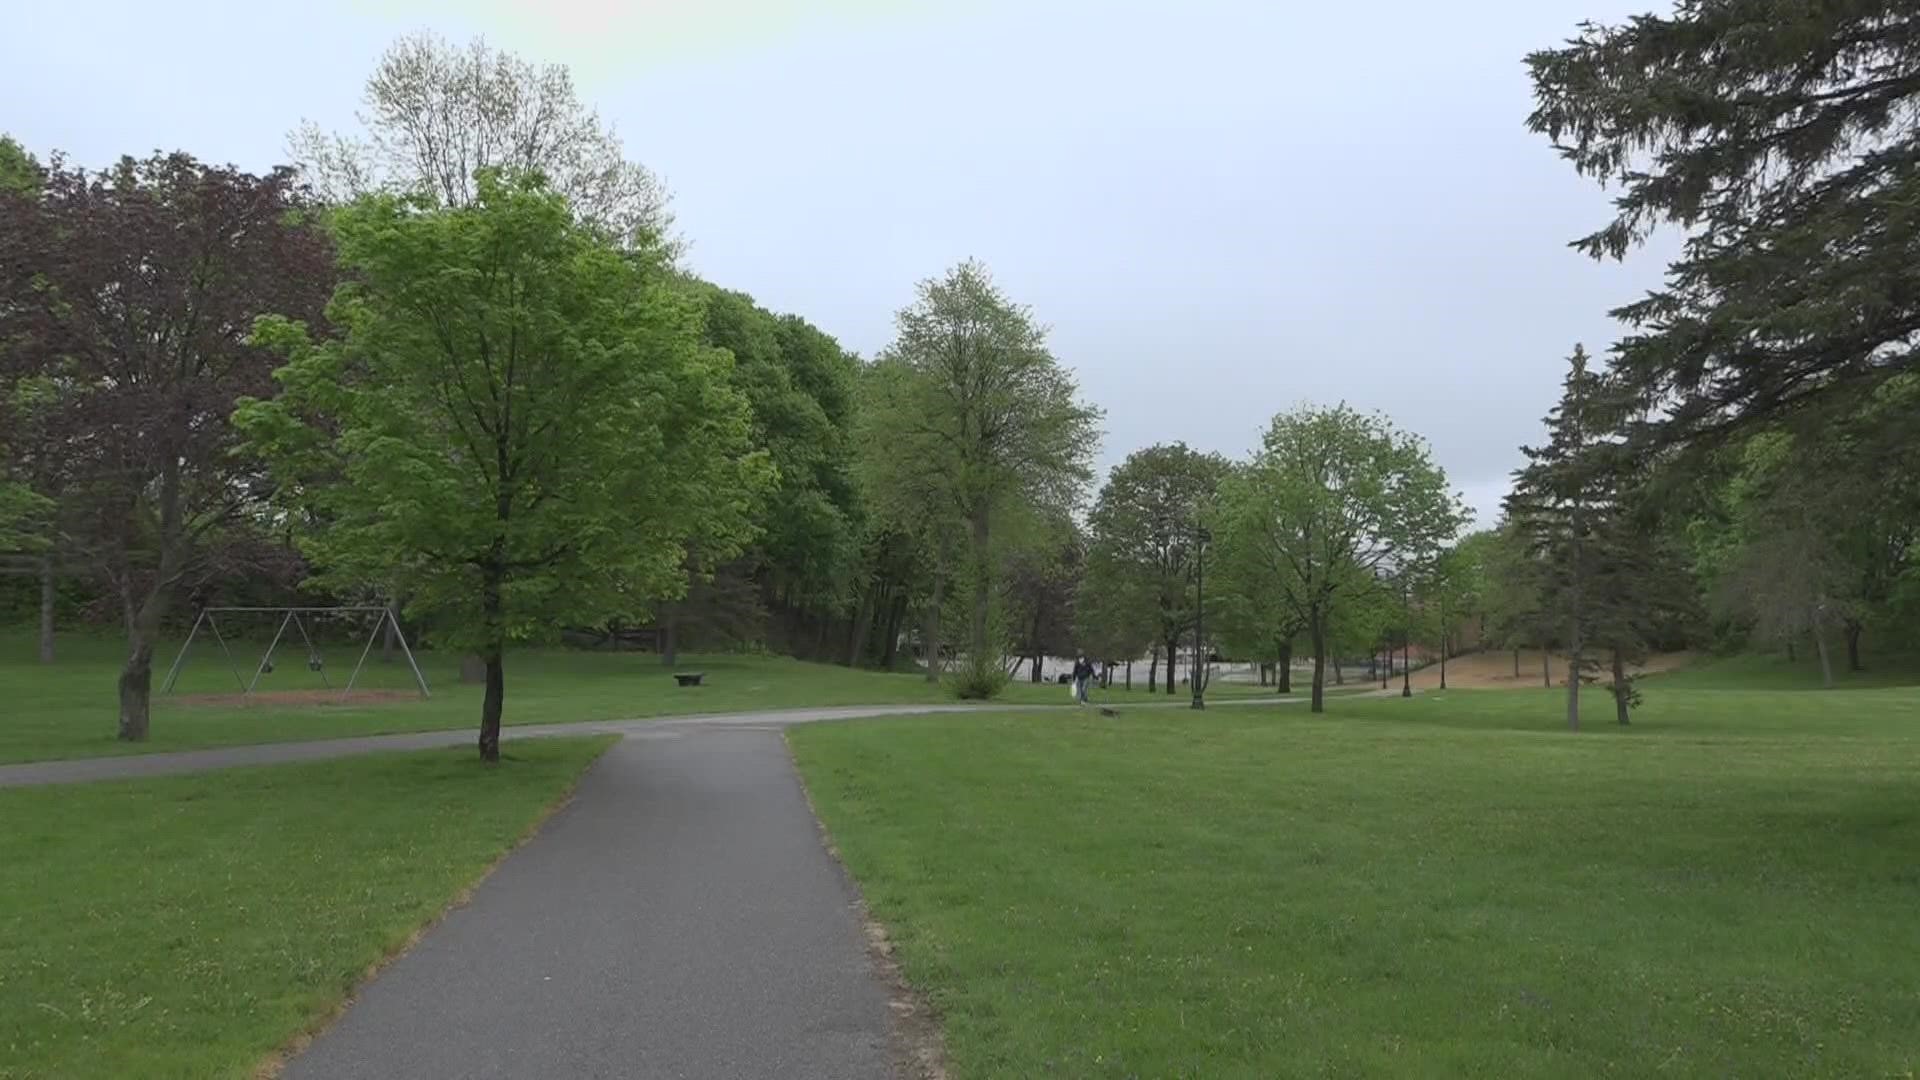 The nonprofits United Way of Eastern Maine and Together Place: Peer Run Recovery Center will be hosting a neighborhood cleanup at Talbot Park in Bangor.